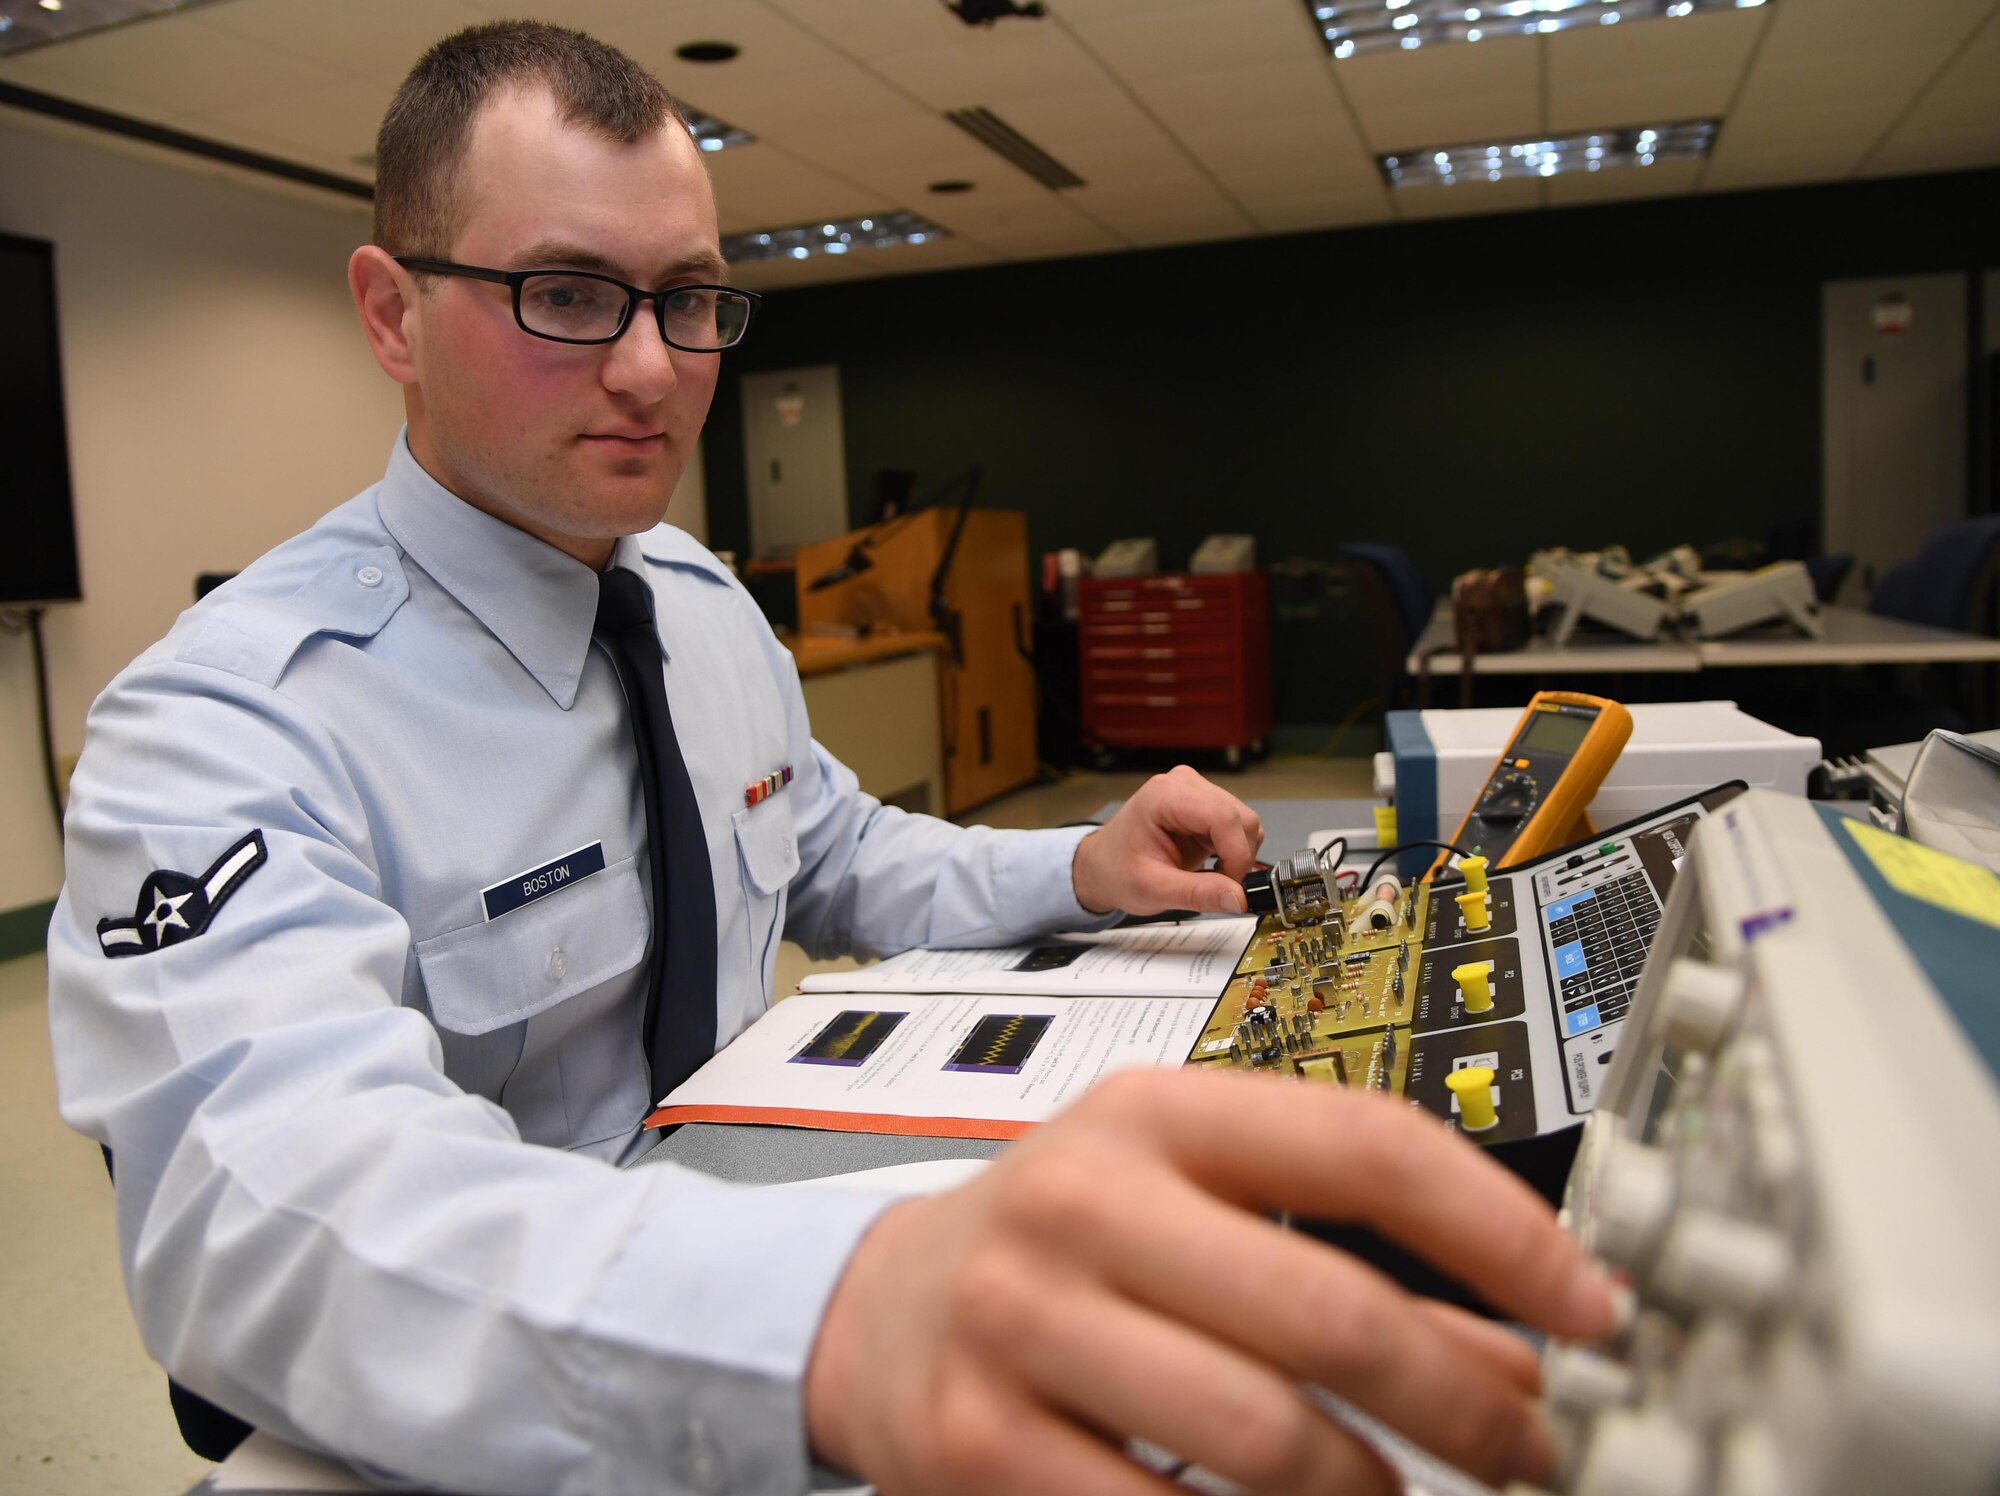 U.S. Air Force Airman Blanford Boston, 338th Training Squadron student, tests amplitude modulation circuits during the Cyber Space Support Common Course inside Dolan Hall at Keesler Air Force Base, Mississippi, Jan. 27, 2020. Boston graduated with perfect scores throughout the course. He will continue his follow-on training in the radio frequency transmission systems course at Keesler AFB. (U.S. Air Force photo by Kemberly Groue)